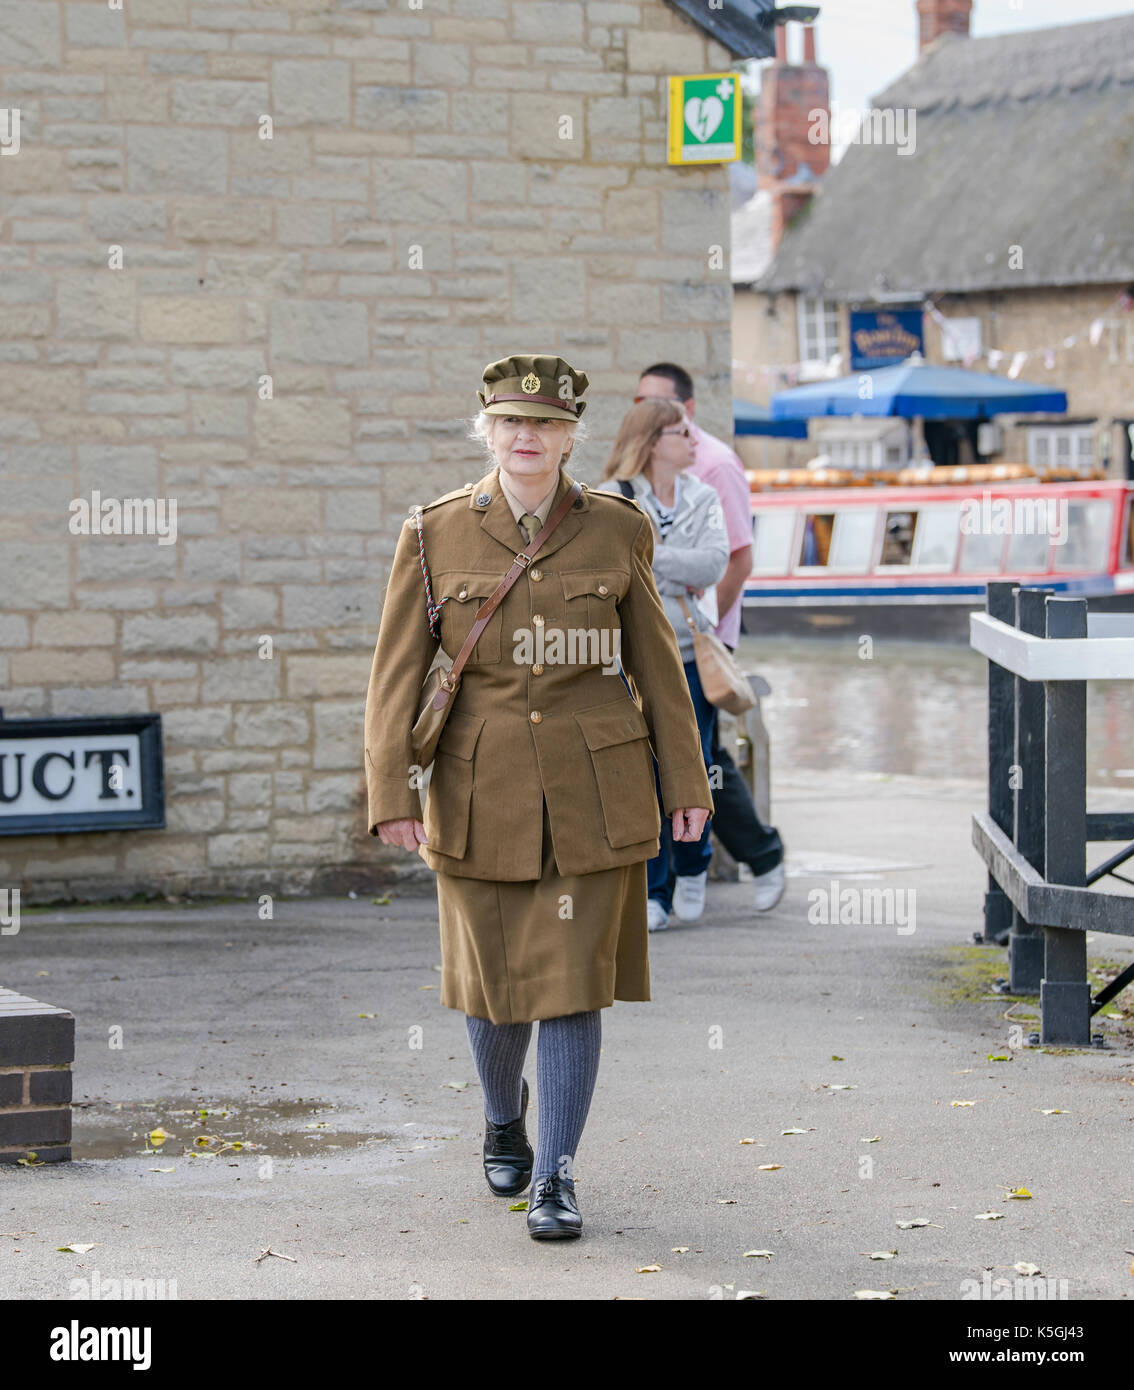 Stoke Bruerne's village at war weekend,re-enactors from all over the UK enjoy a weekend of vintage fun. Credit: Scott Carruthers/Alamy Live News Stock Photo